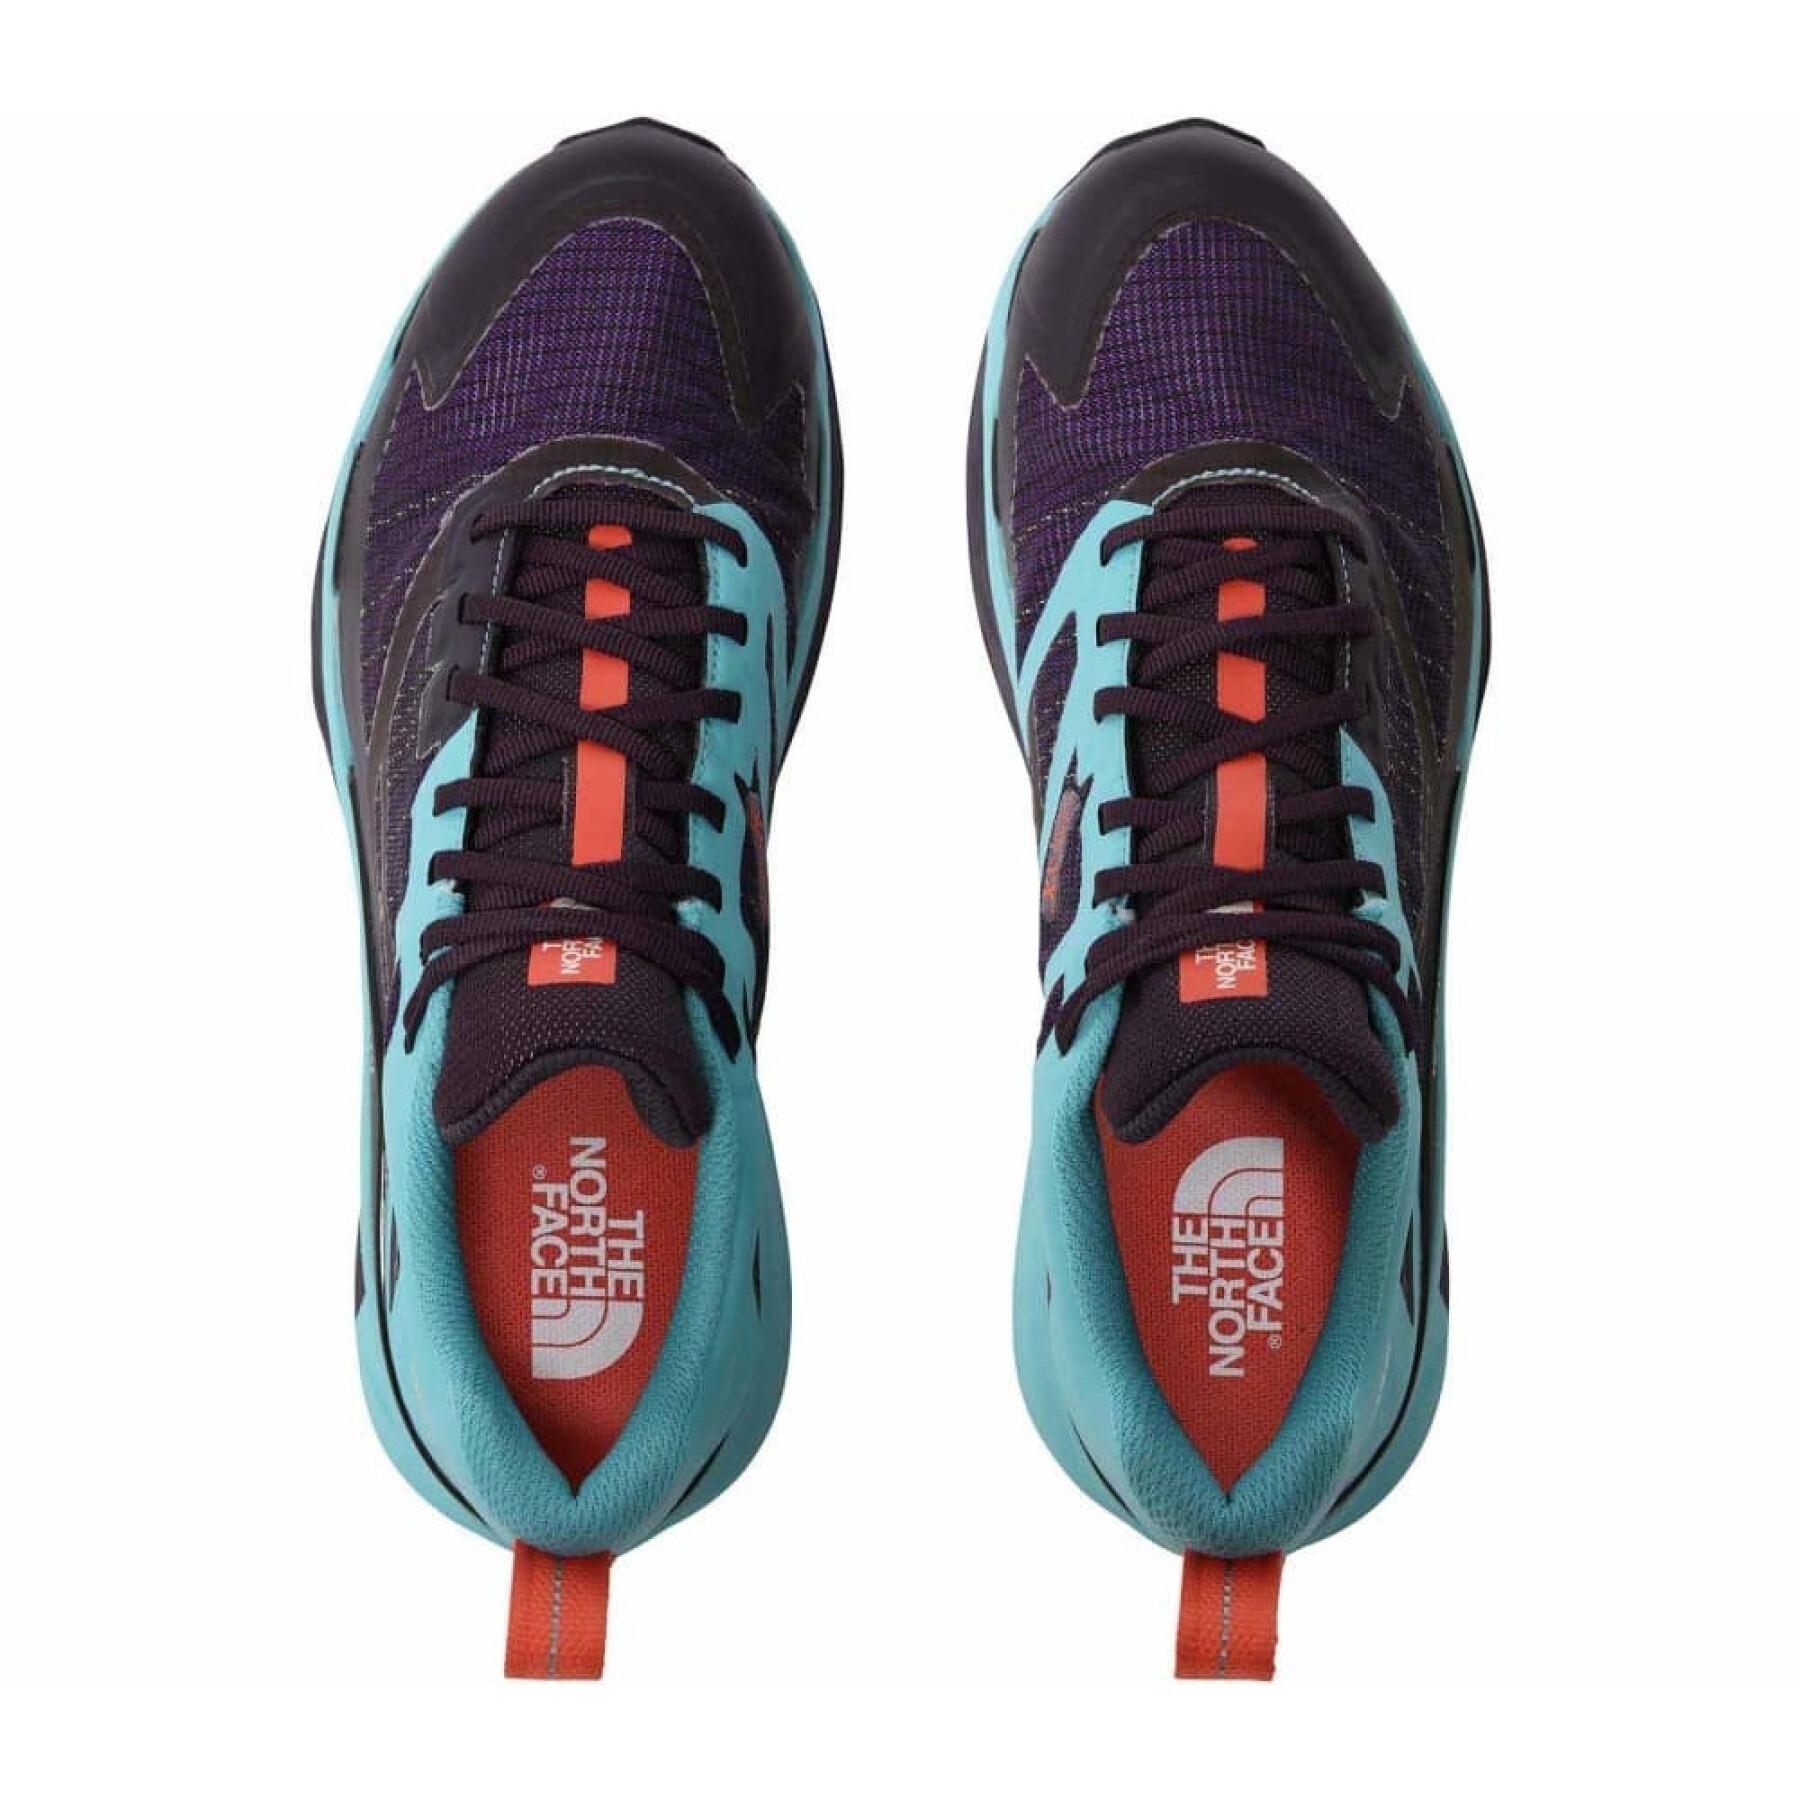 Women's Trail running shoes The North Face Vectiv infinite futureLight™